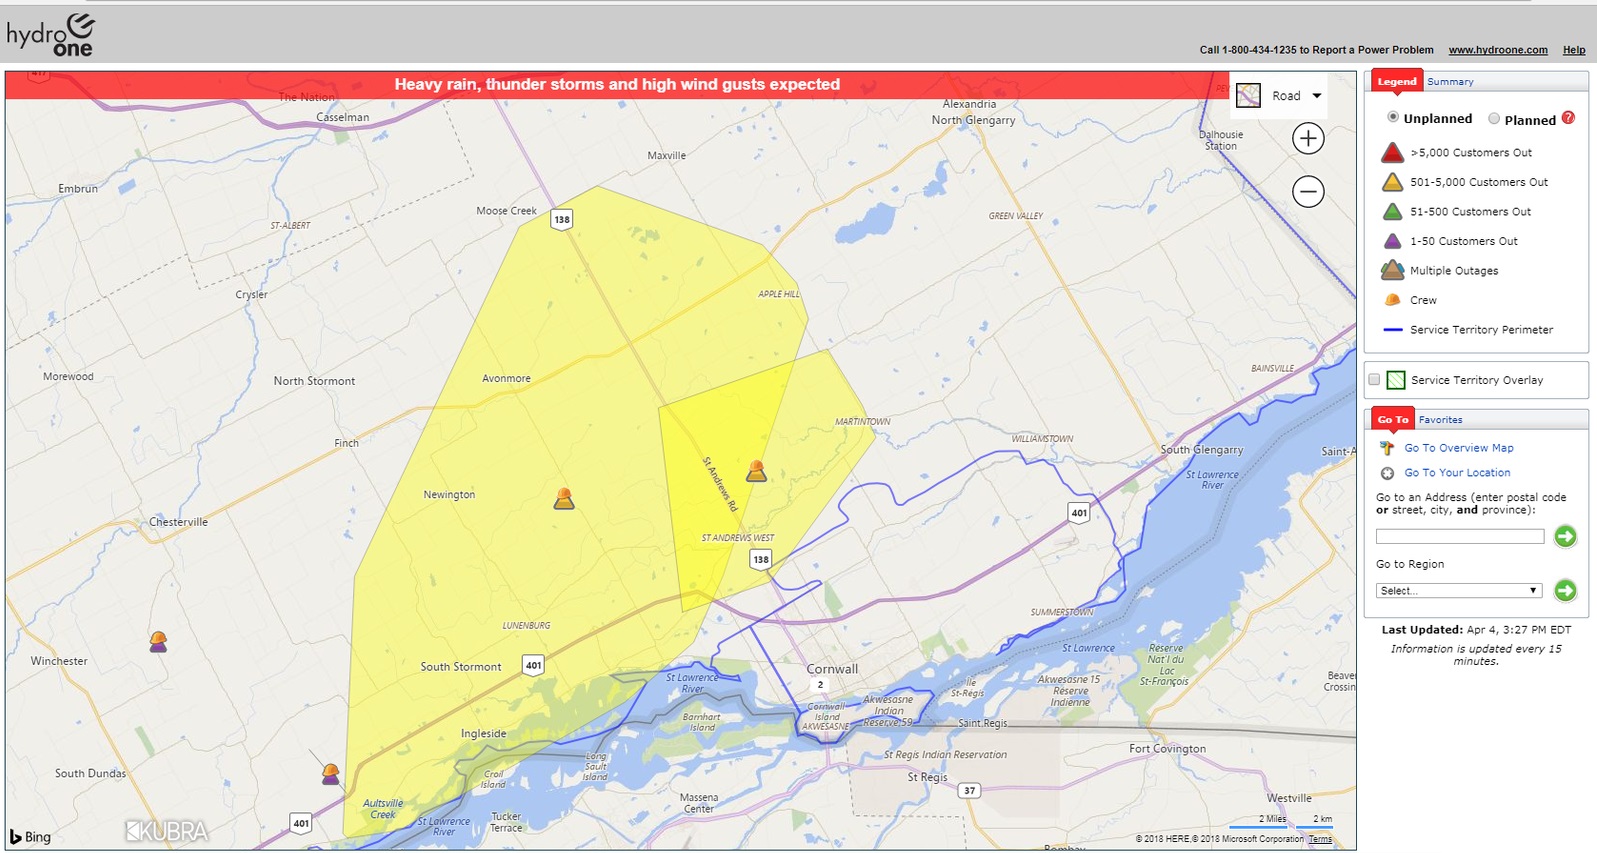 Large power outages in South Stormont and South Glengarry